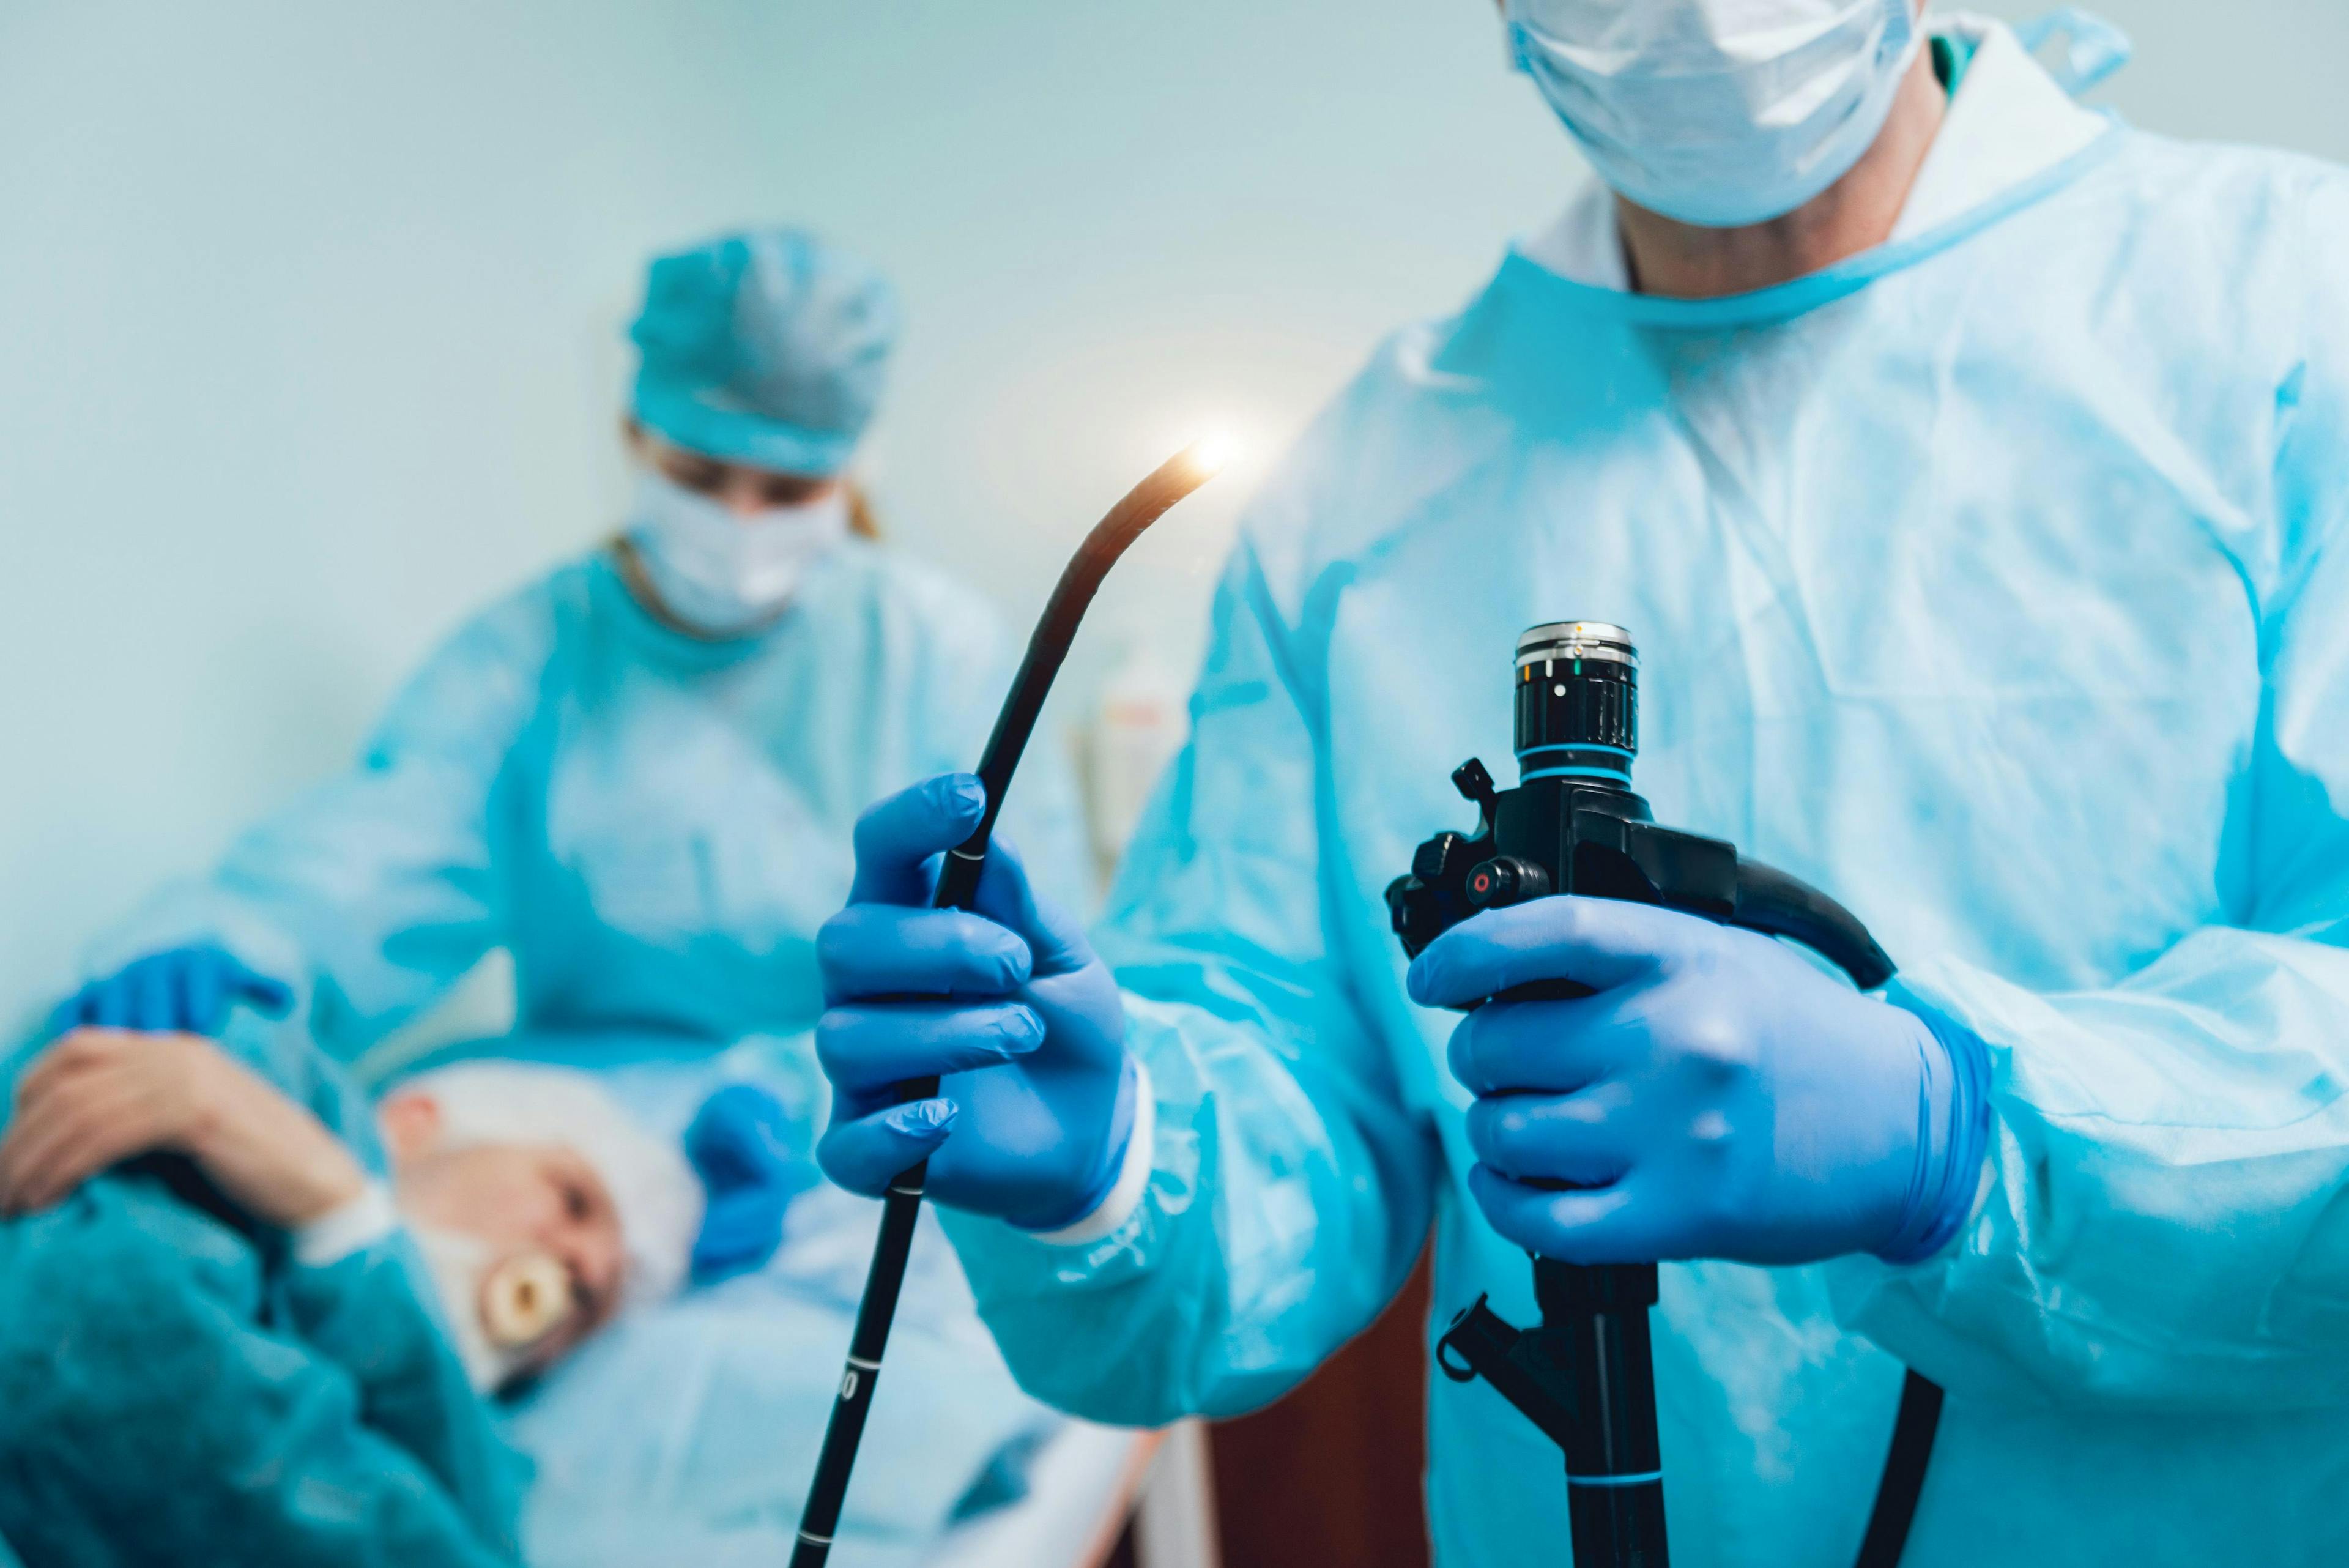 Doctor preparing for an endoscopic procedure.